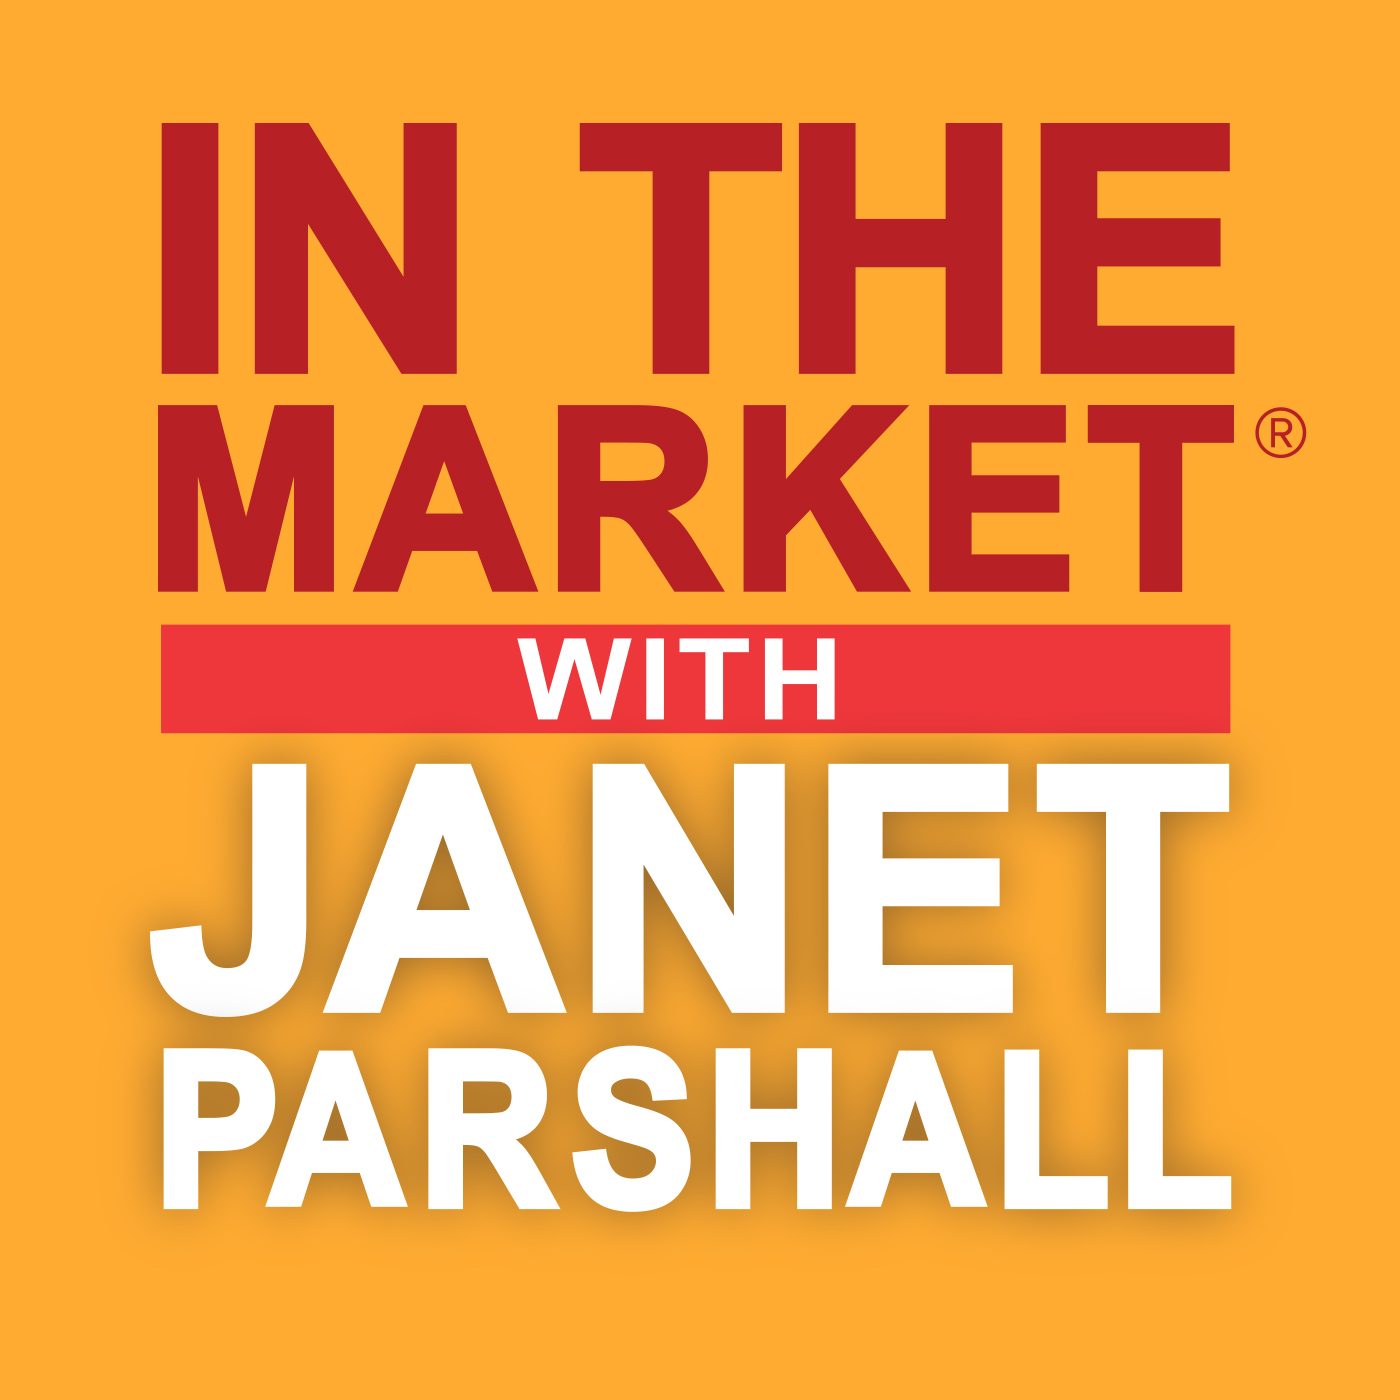  Best of In The Market with Janet Parshall: Angels